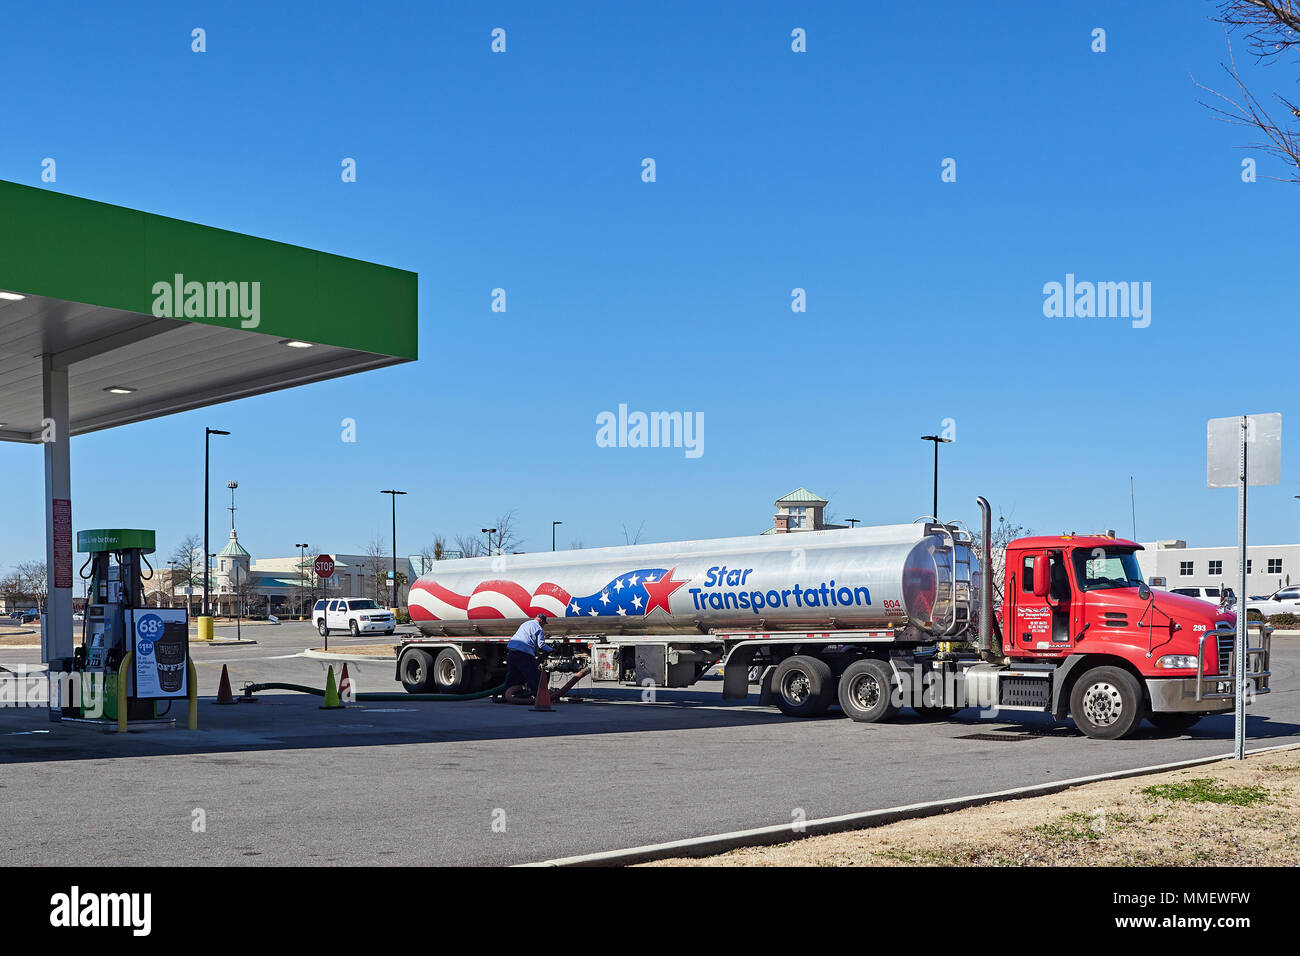 Gasoline or petrol tank truck supplying or off loading fuel at a retail gas station in Montgomery Alabama, USA. Stock Photo